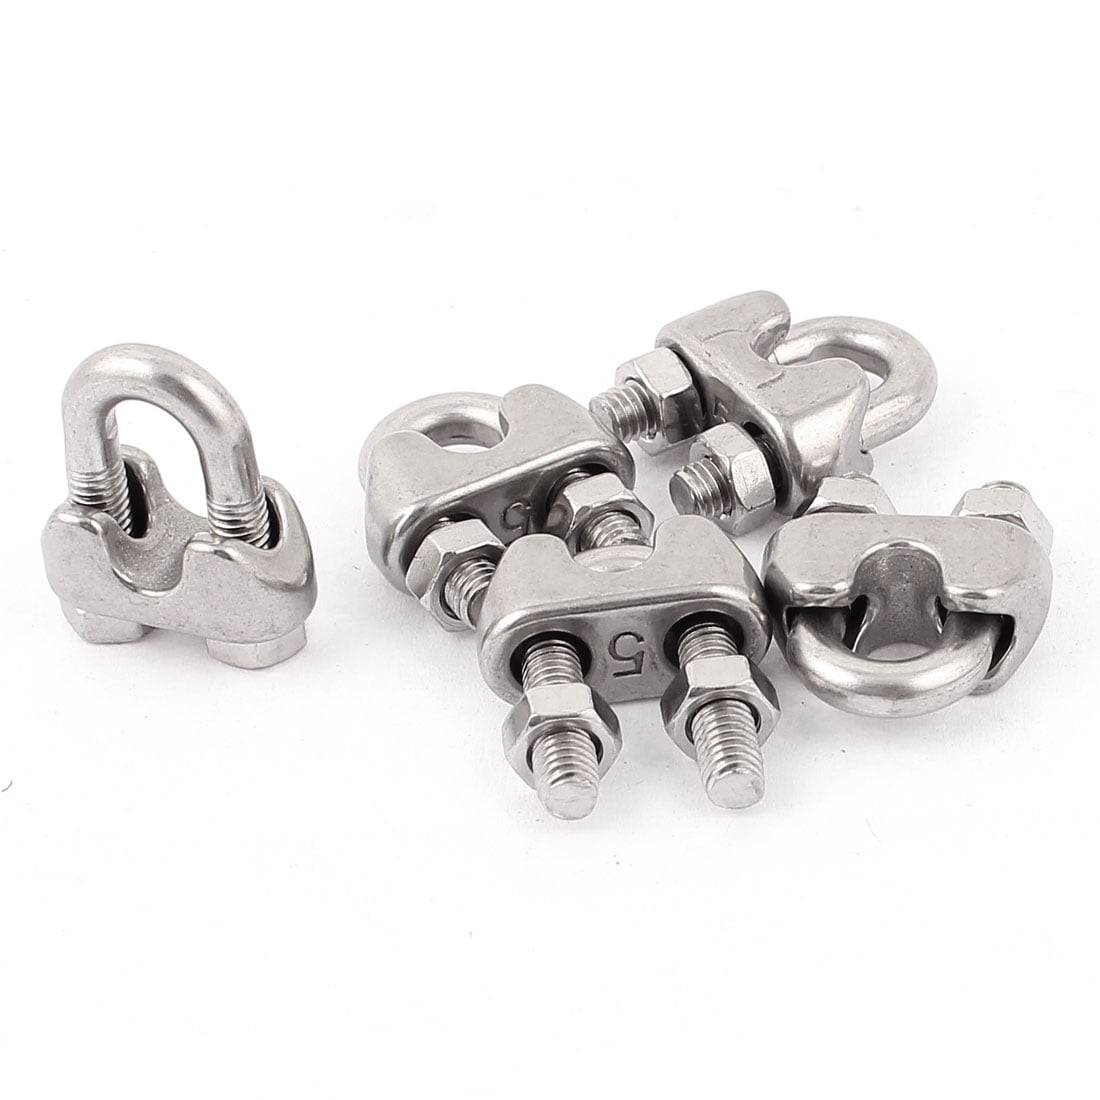 M5 3/16 Inch 304 Stainless Steel U-Shape Bolt Clamps Cable Wire Rope Clips 6PCS 